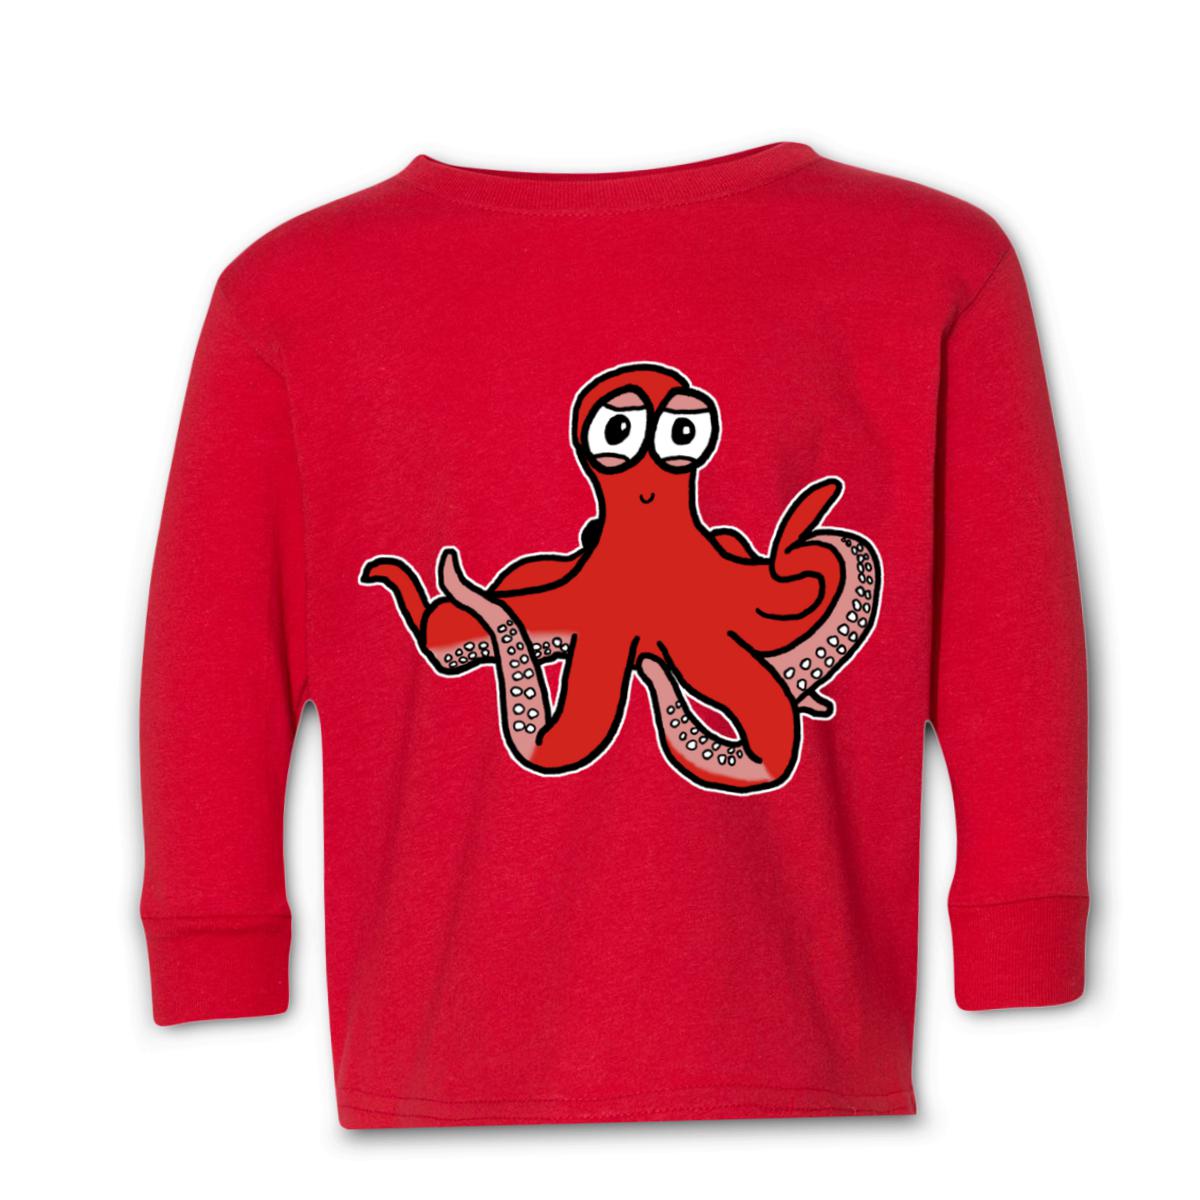 Octopus Kid's Long Sleeve Tee Small red